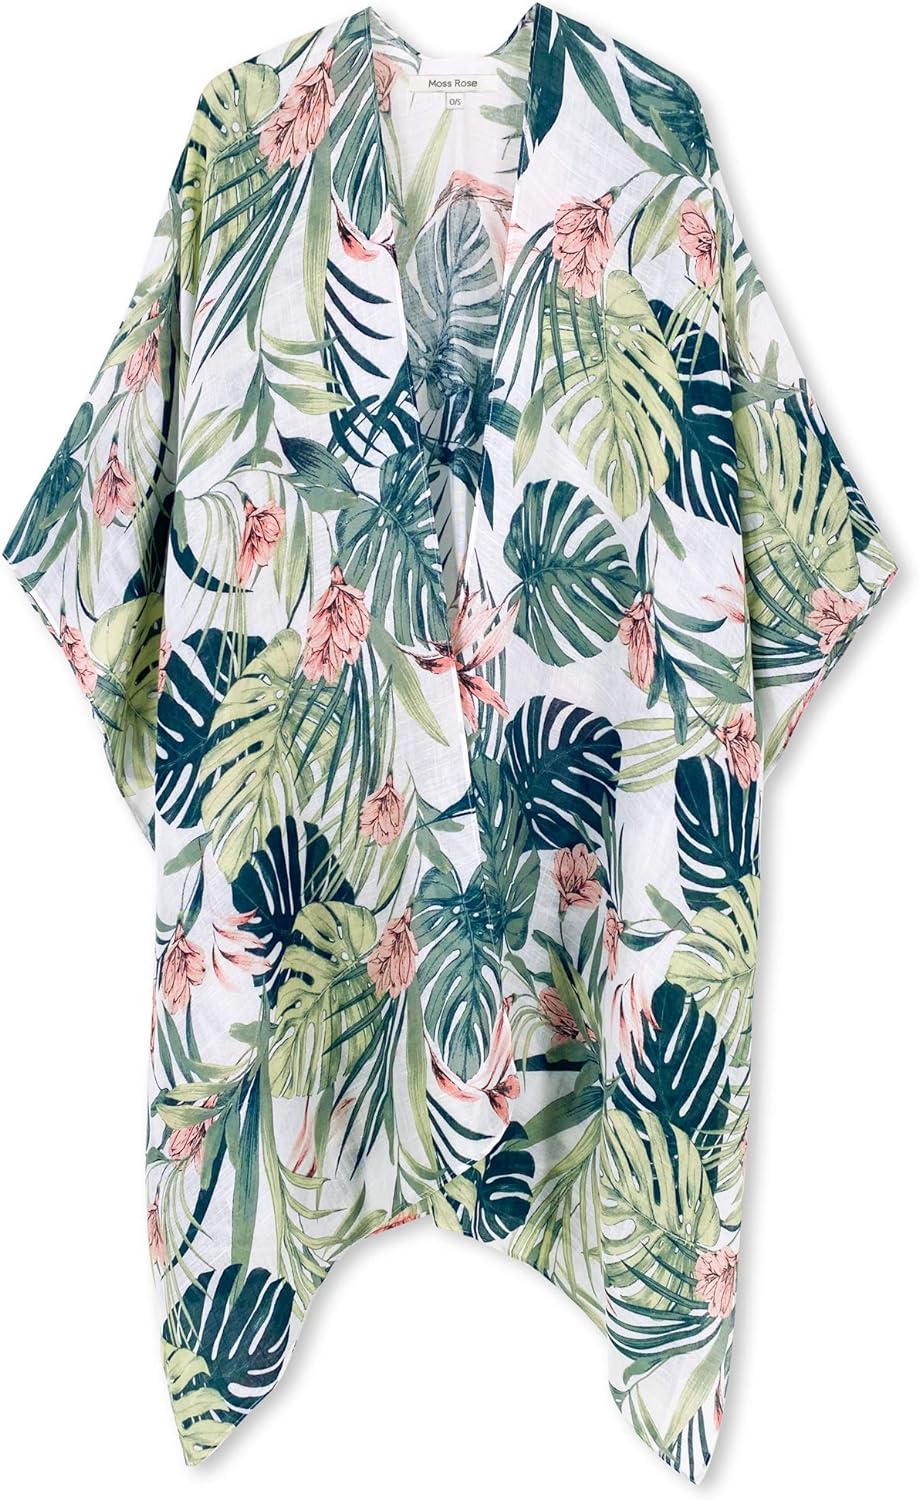 Moss Rose Kimono Swimsuit Cover Up Review